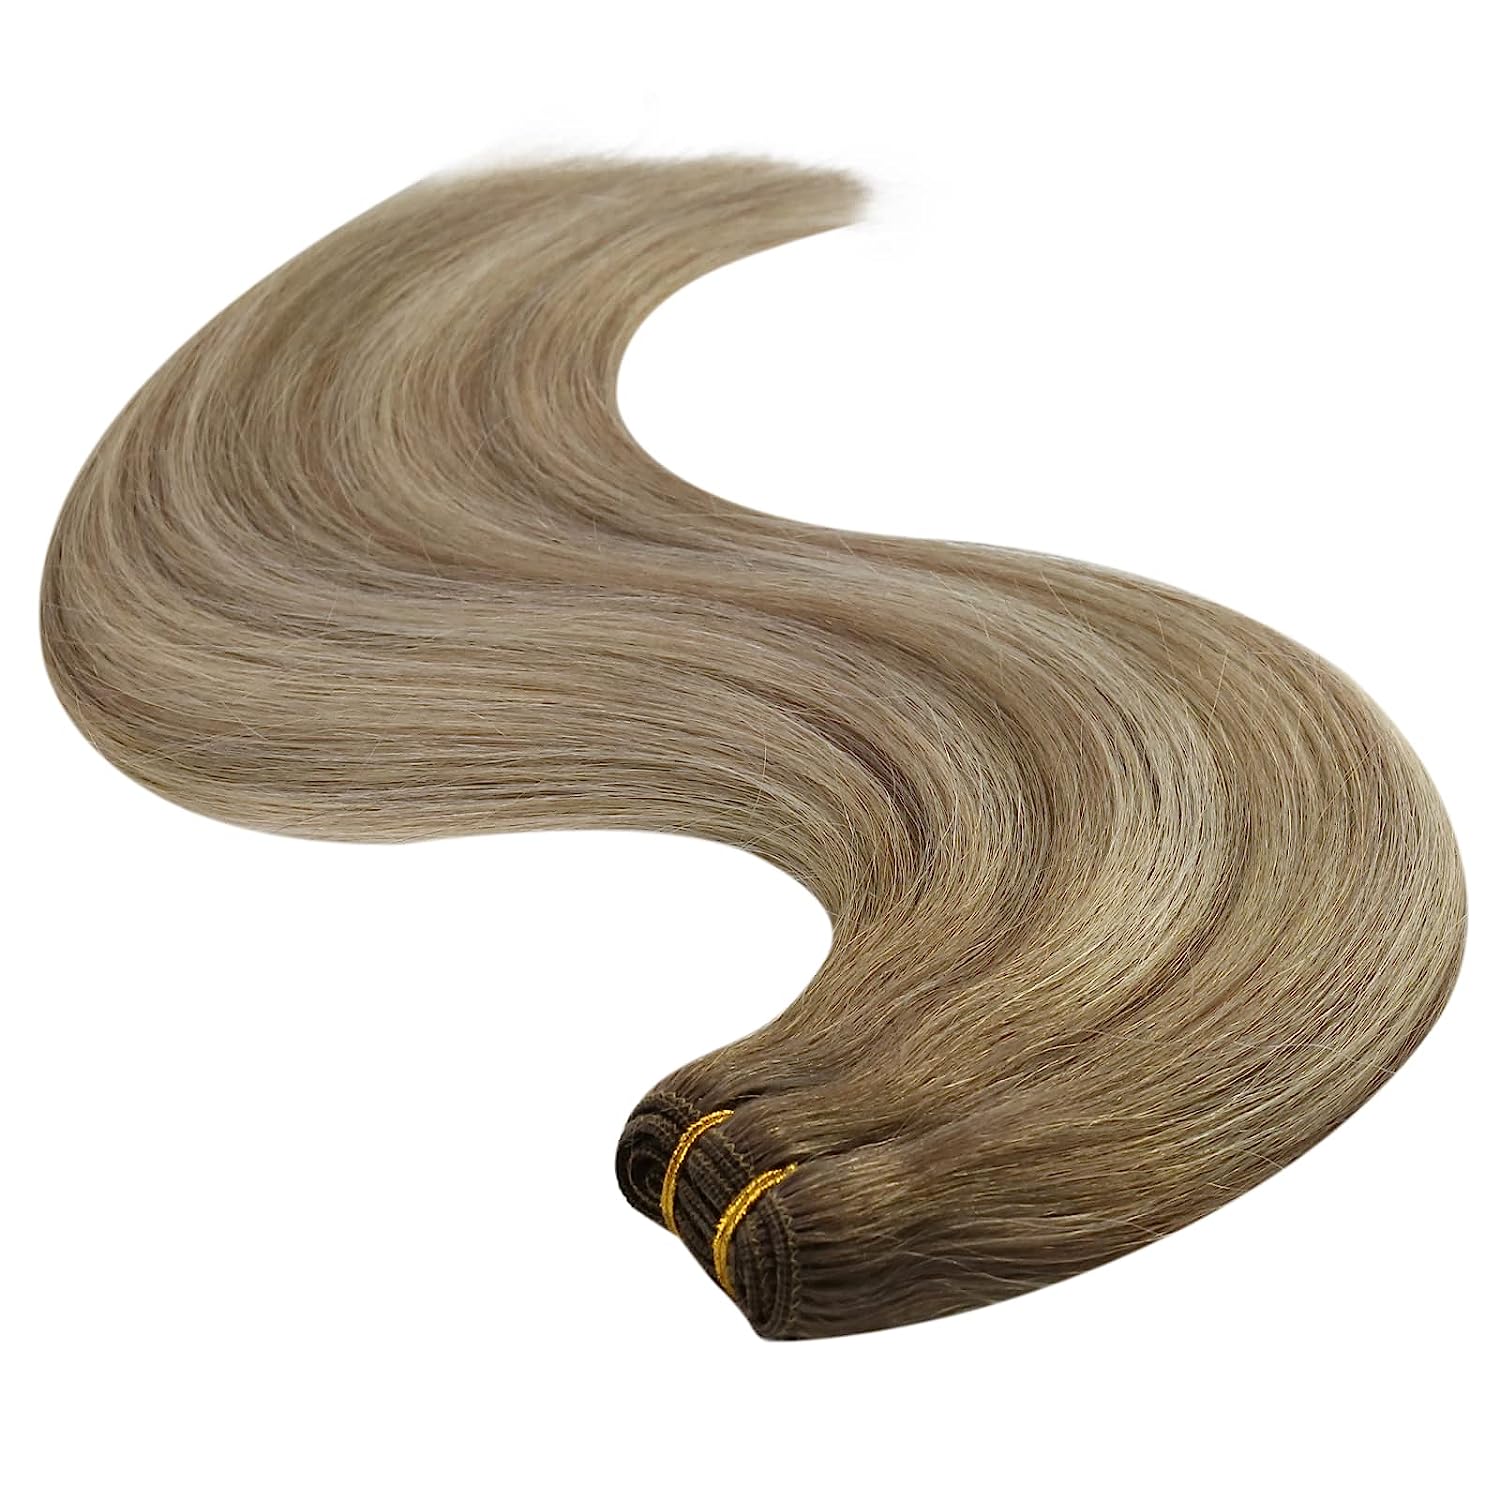 Remy Hair Weft Extensions Human Hair